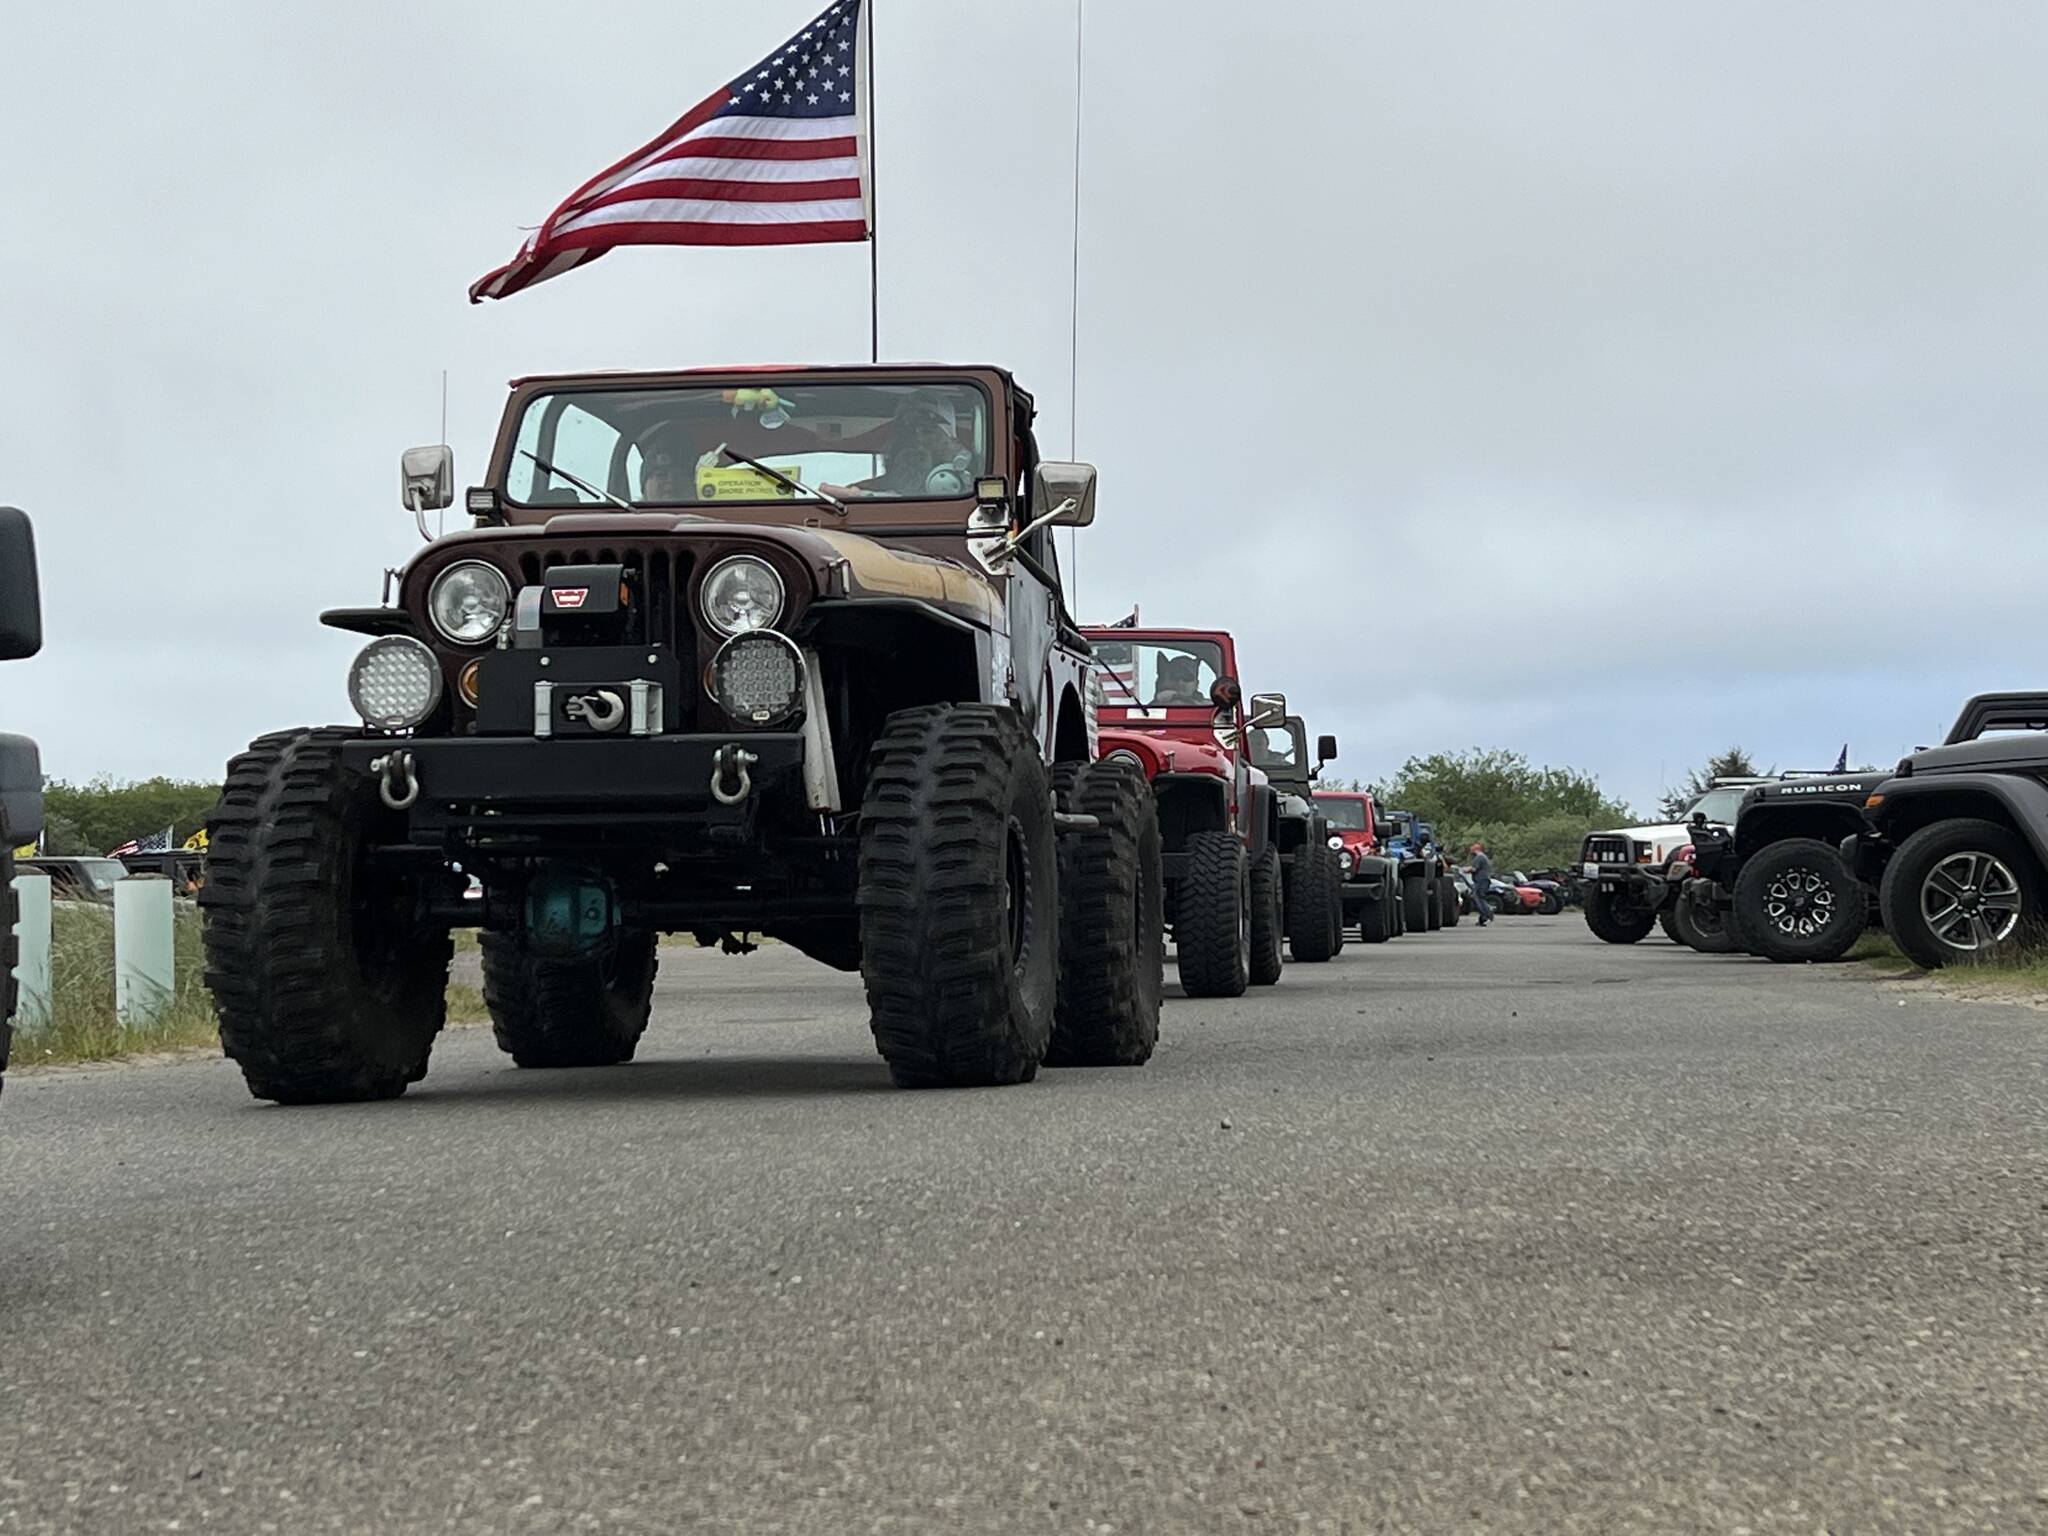 Clayton Franke / The Daily World
A parade of 700 Jeeps leaves the parking lot at Oyhut Bay Seaside Village on Saturday, May 20.